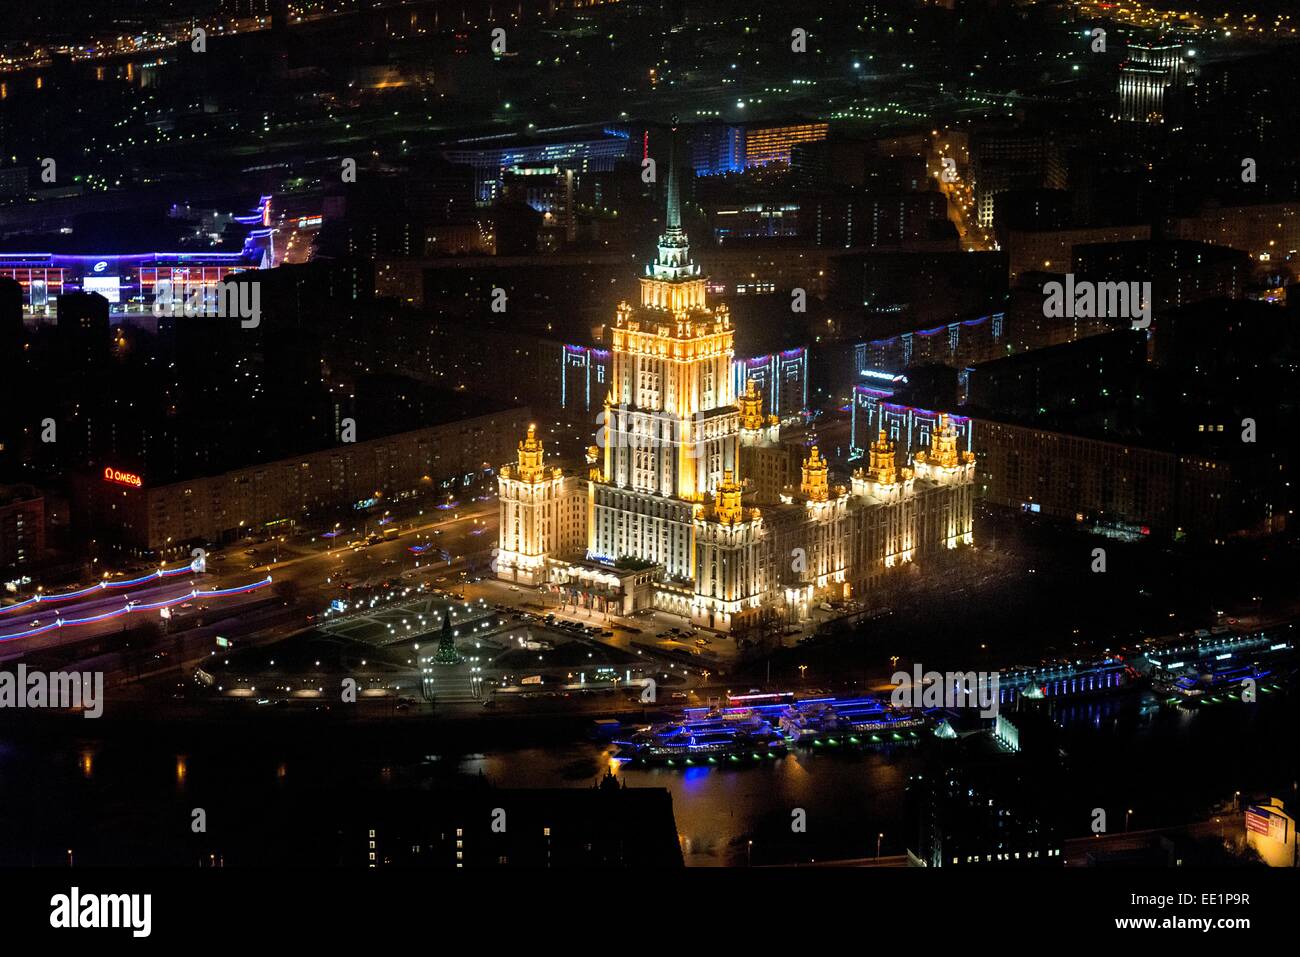 Moscow, Russia. Hotel 'Ukraina' (now called 'Radisson Royal Hotel Moscow') building. Stock Photo